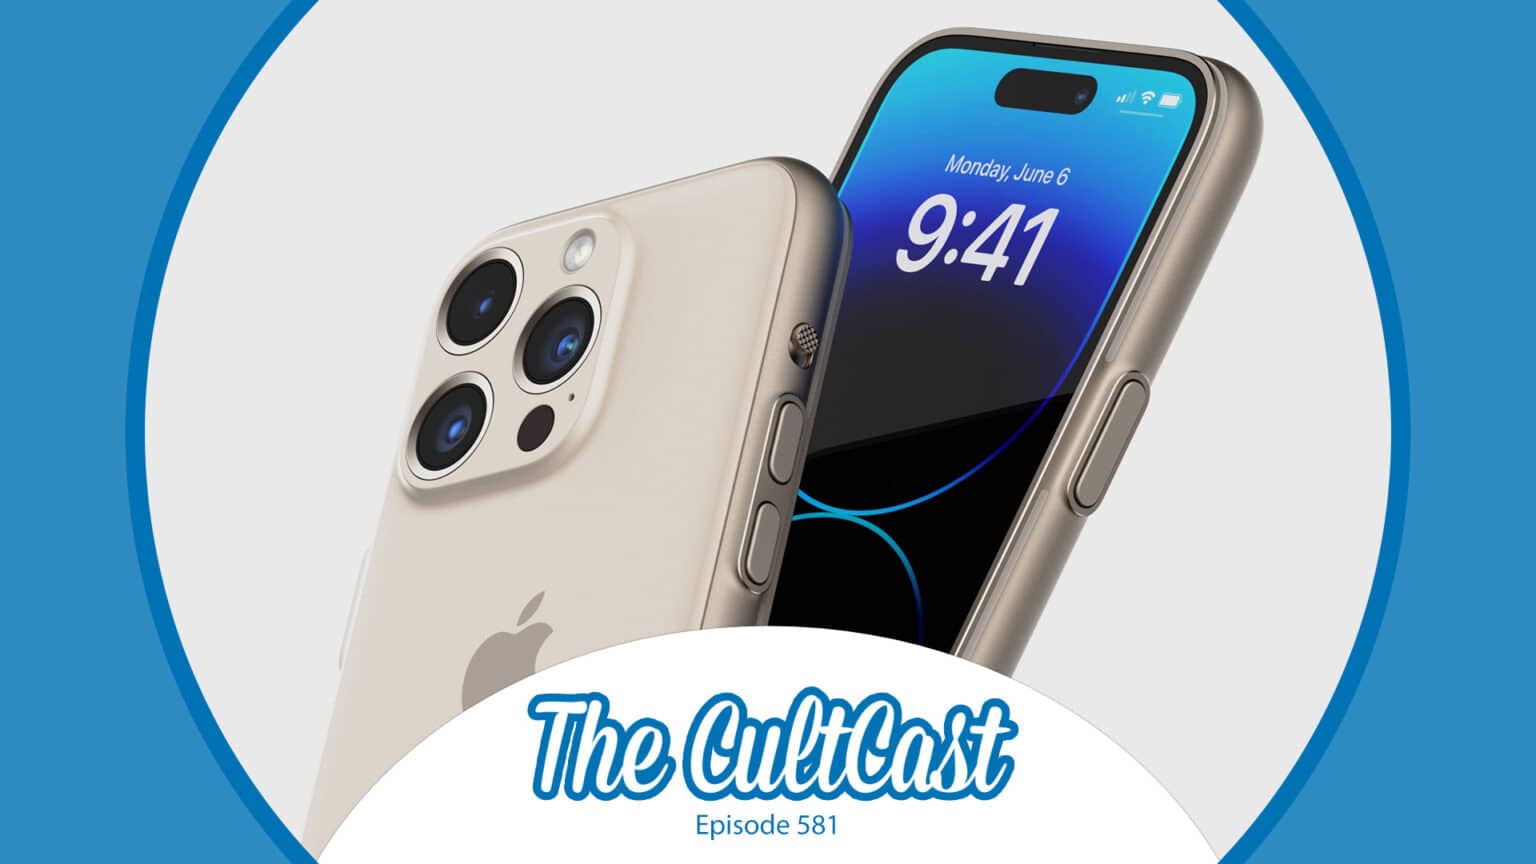 Concept art shows what the iPhone Ultra might look like in a promo image for The CultCast, Cult of Mac's weekly Apple podcast.